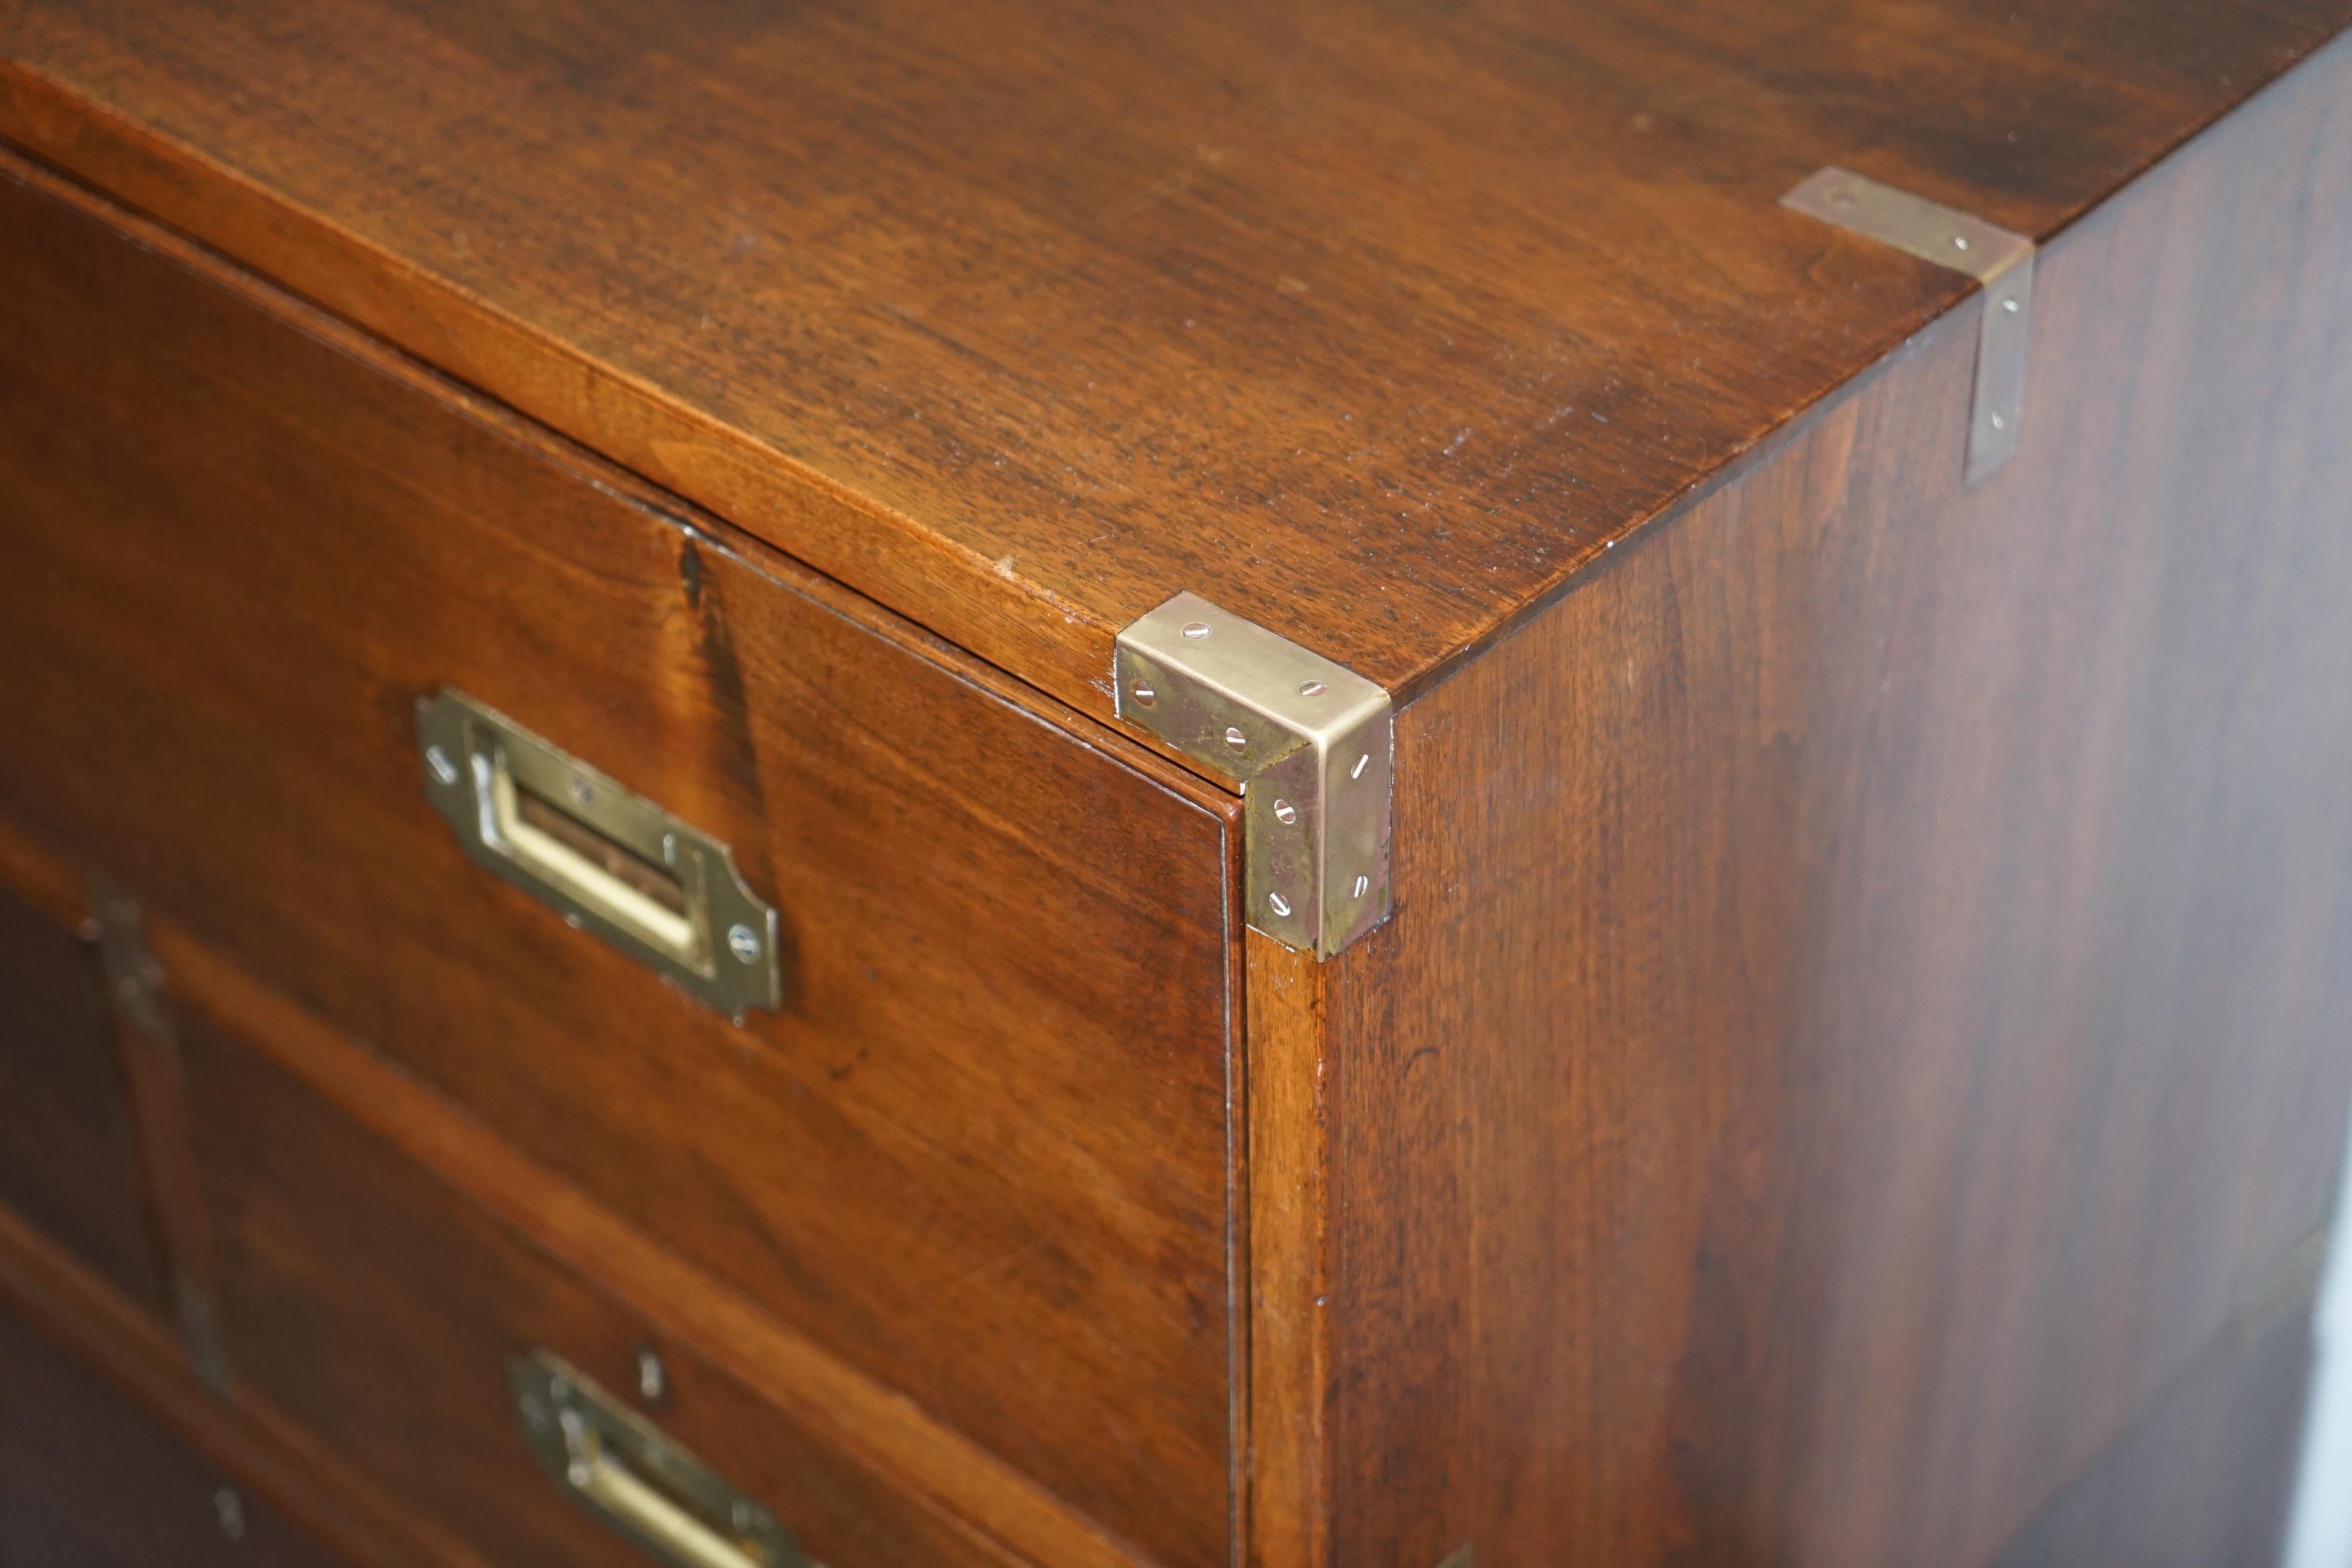 Mahogany Victorian Military Campaign Chest of Drawers Built in Secrataire Drop Front Desk